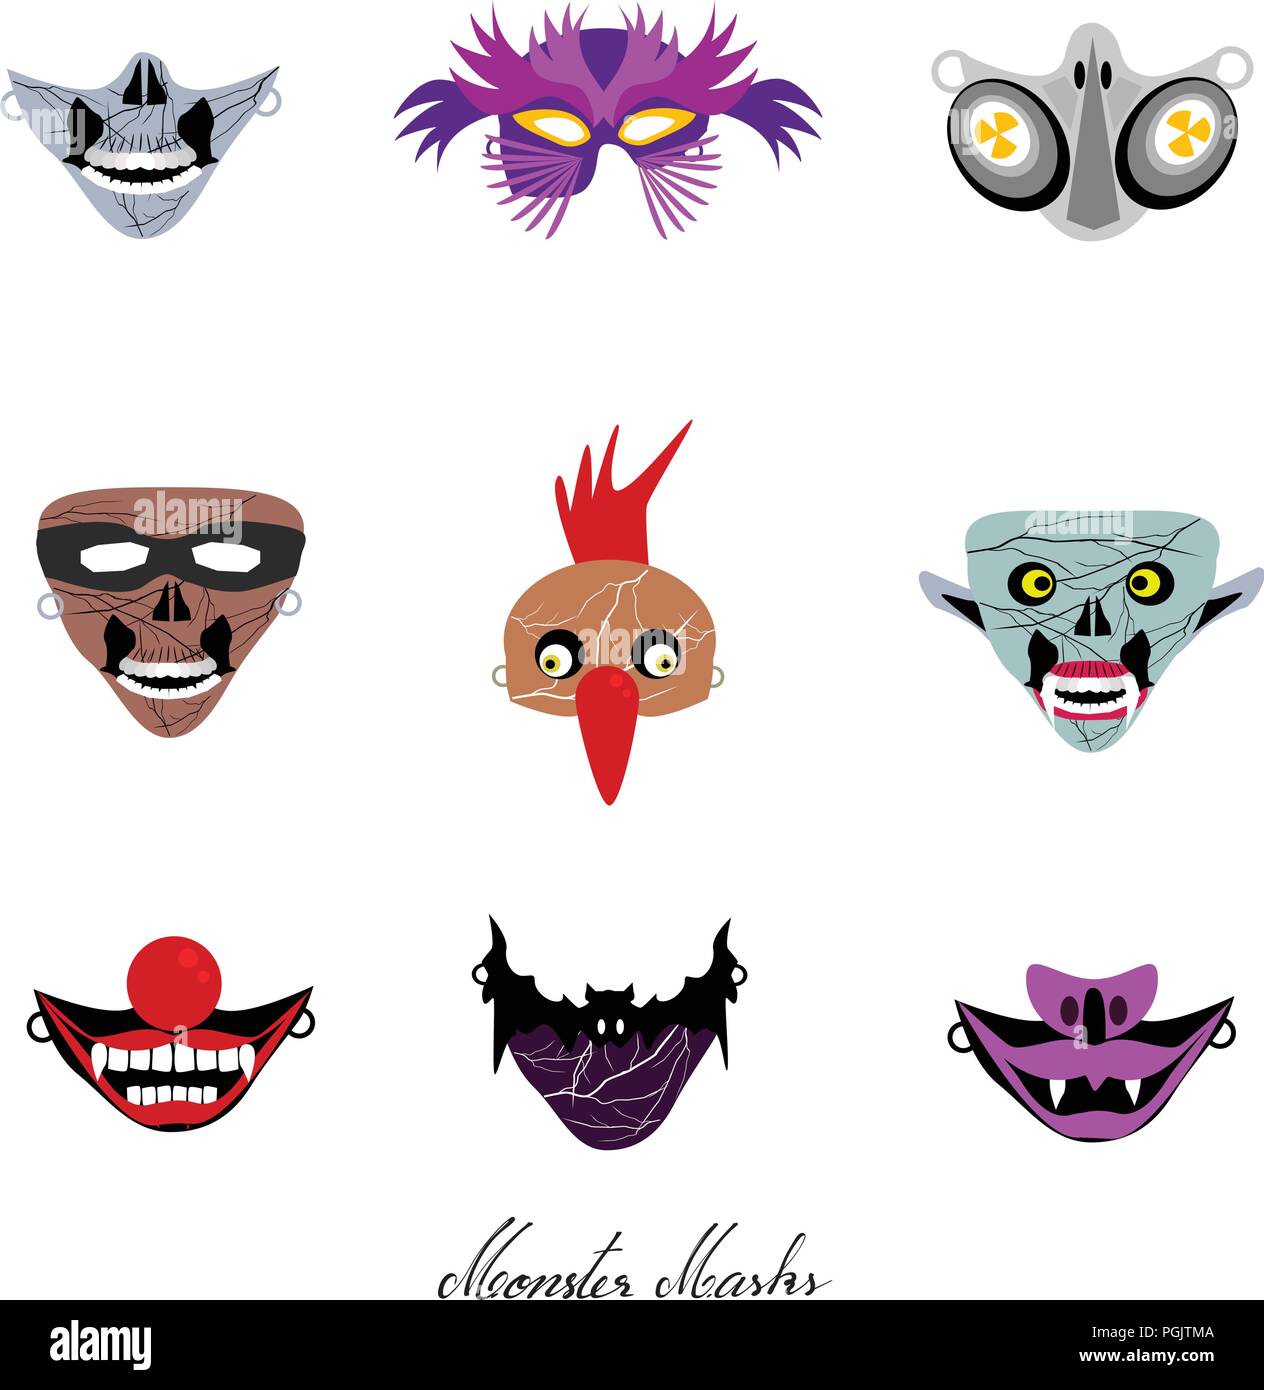 Holidays And Celebrations, Illustration Set of Clowns, Aliens and Evils Masks For Halloween Celebration Party. Stock Vector